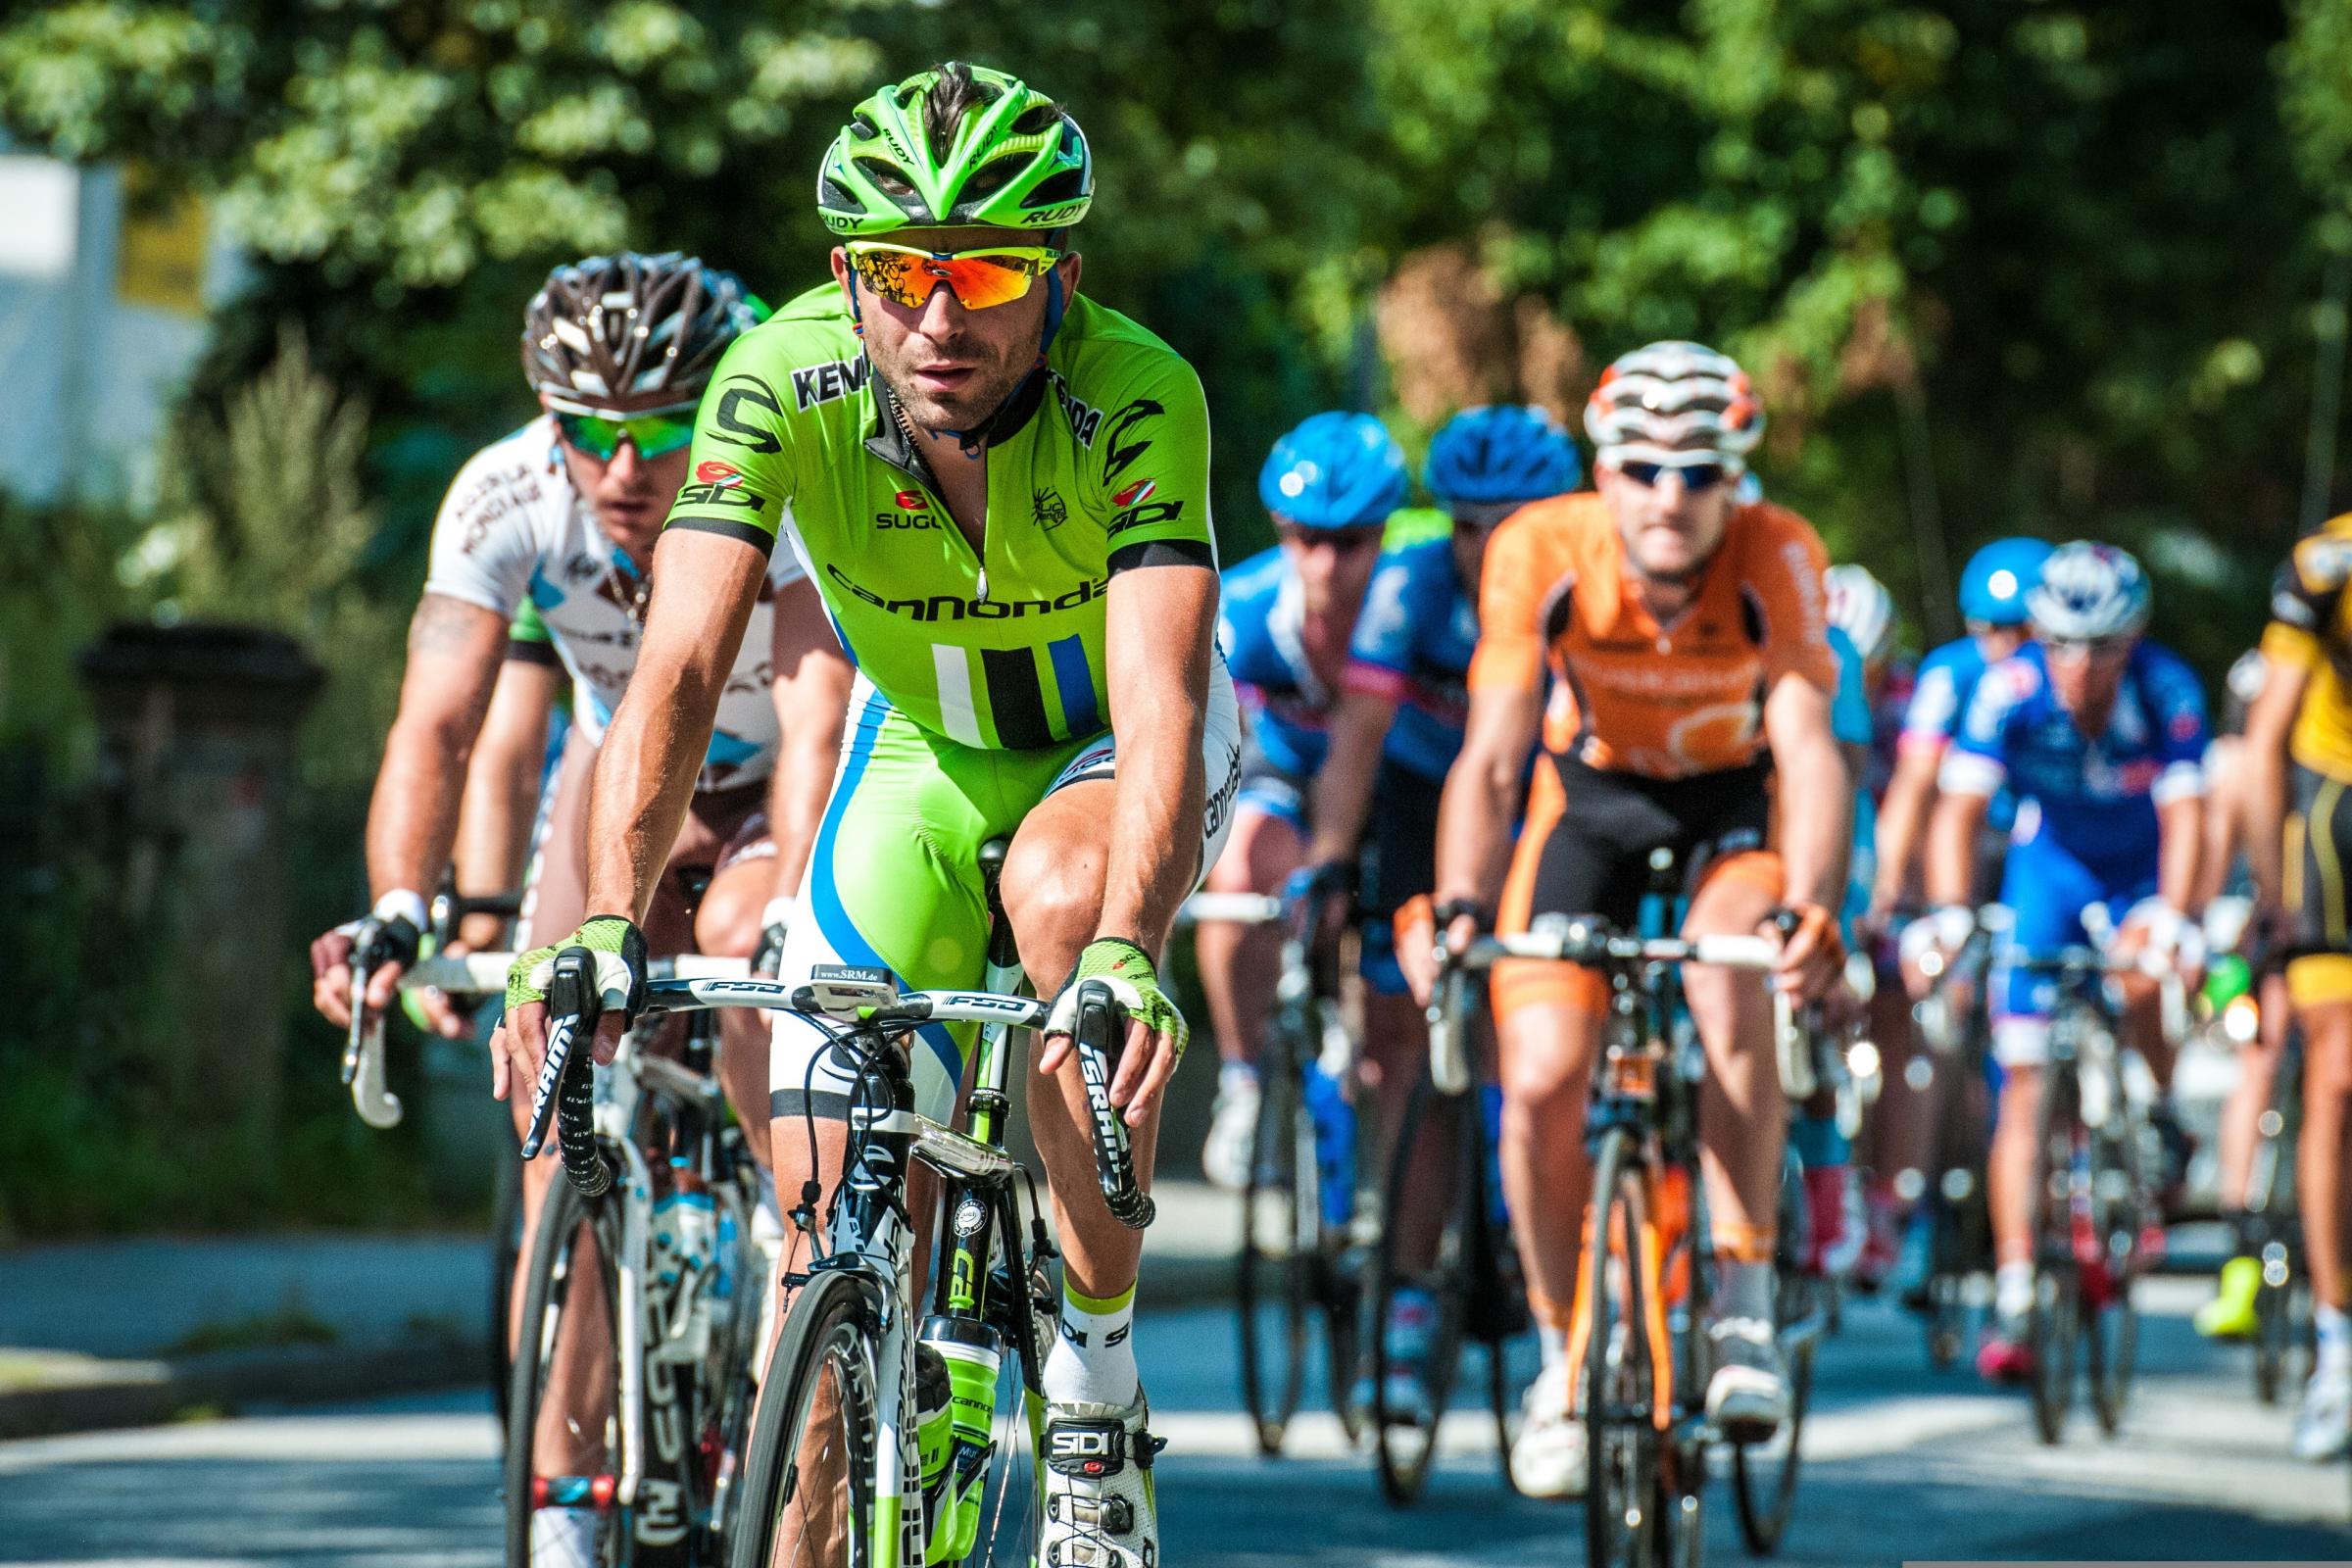 Brett Ellis loves watching mountain stages of cycling races. Photo: Pixabay